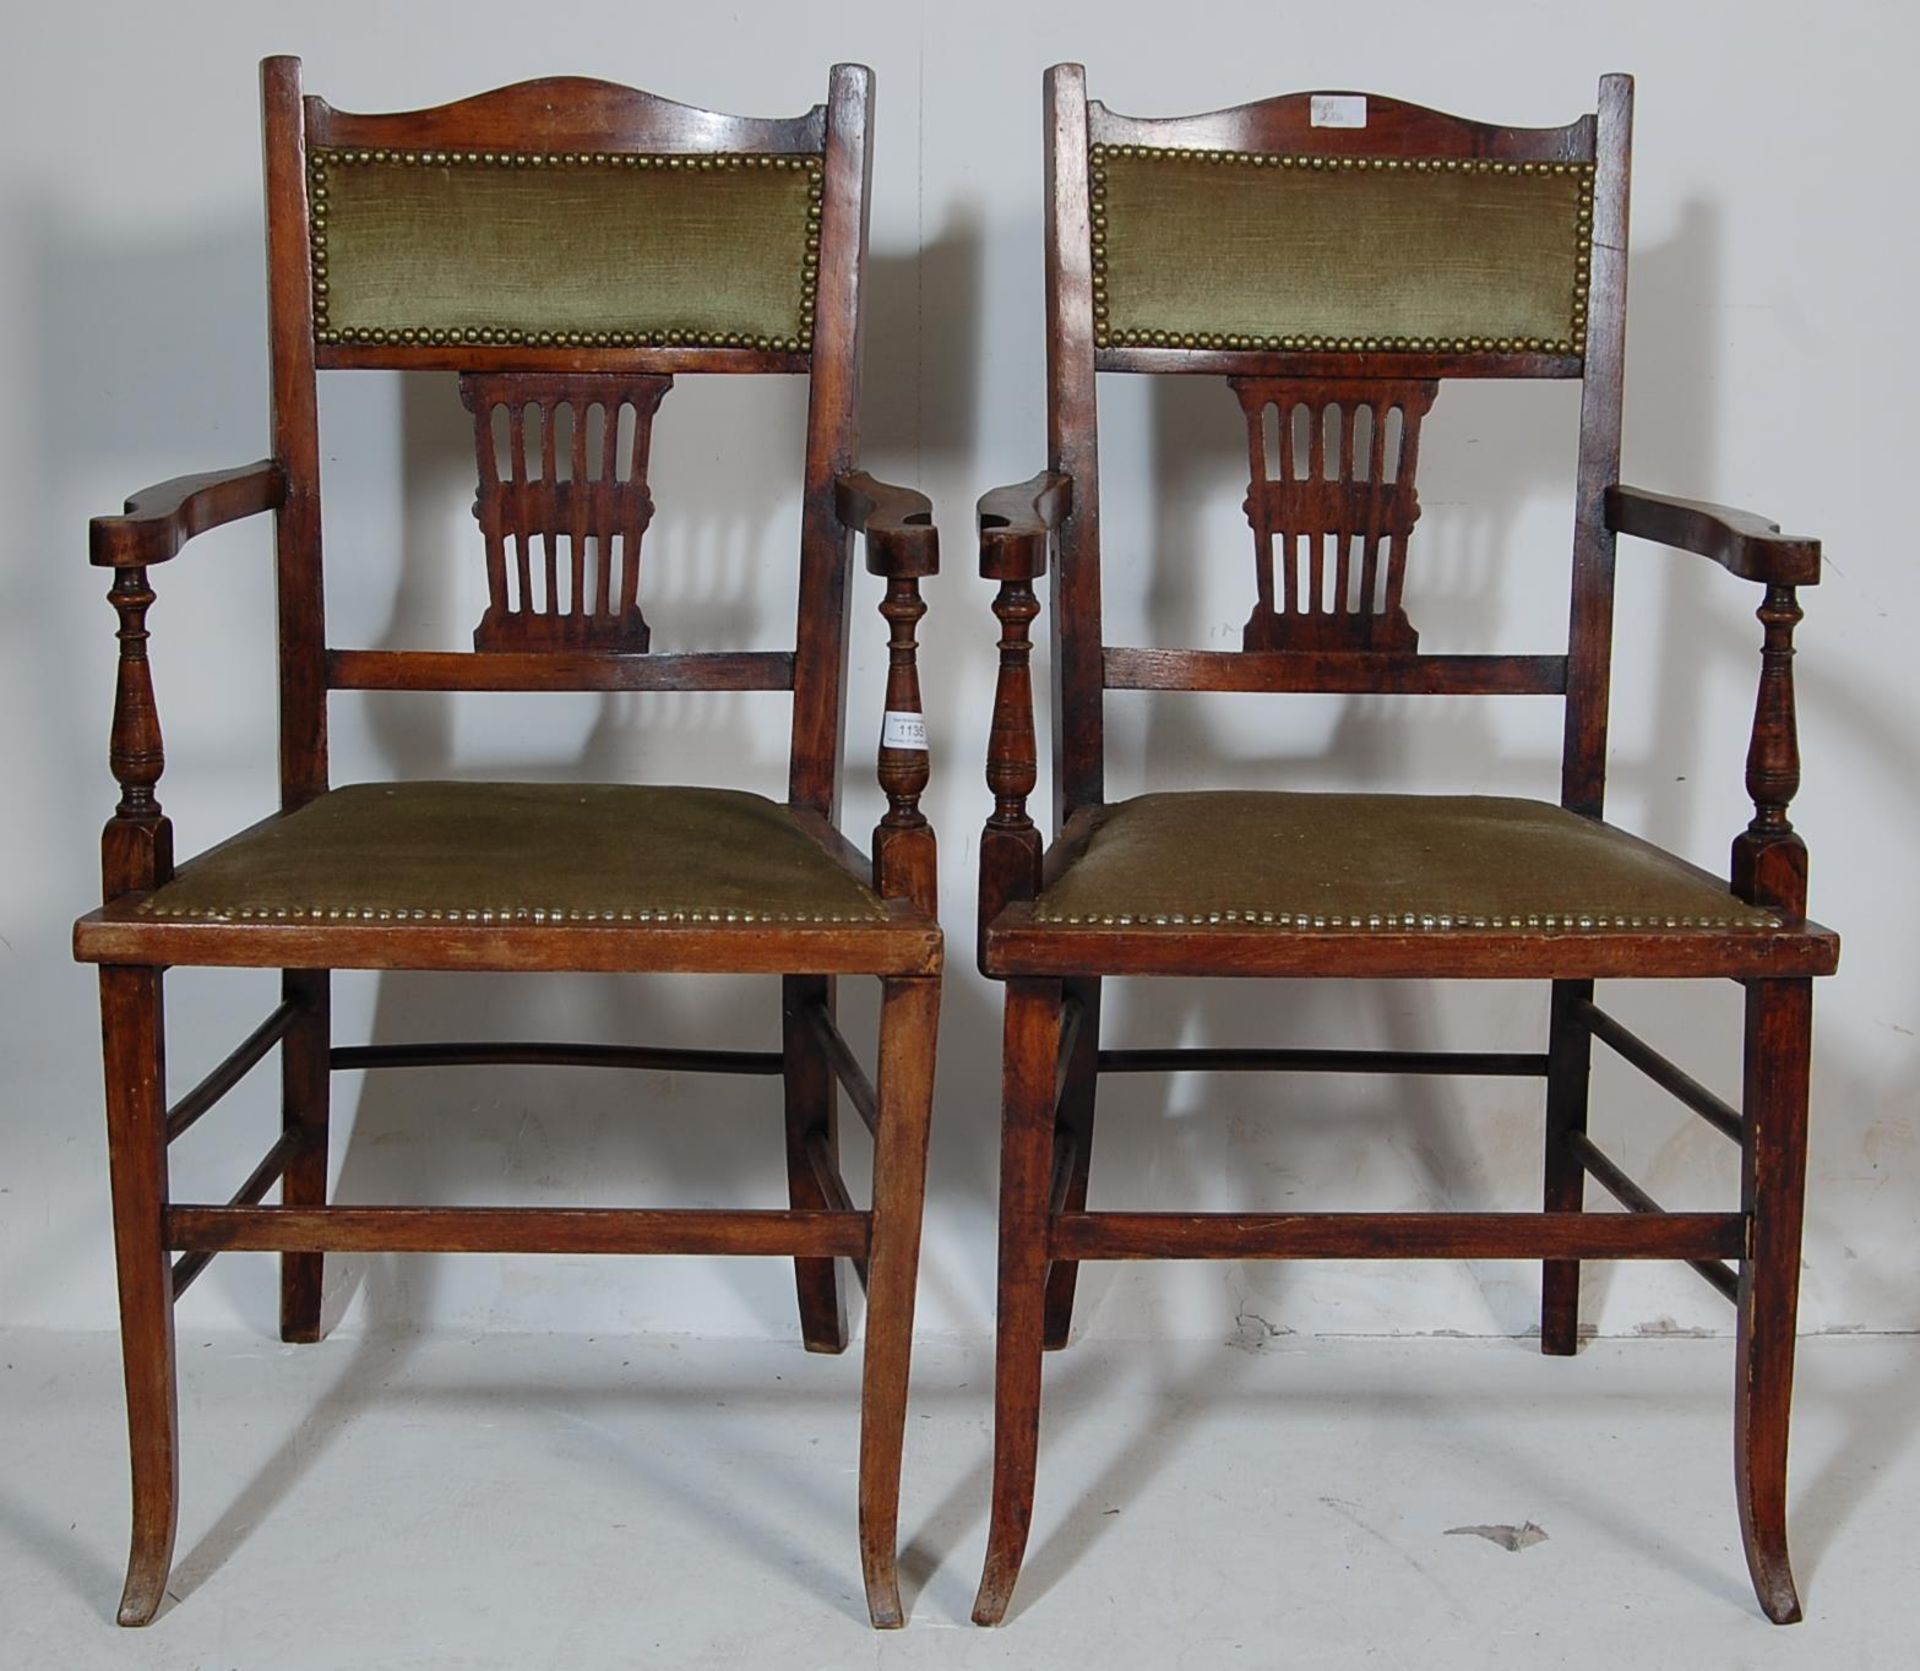 TWO 19TH CENTURY LATE VICTORIAN BEDROOM CHAIRS